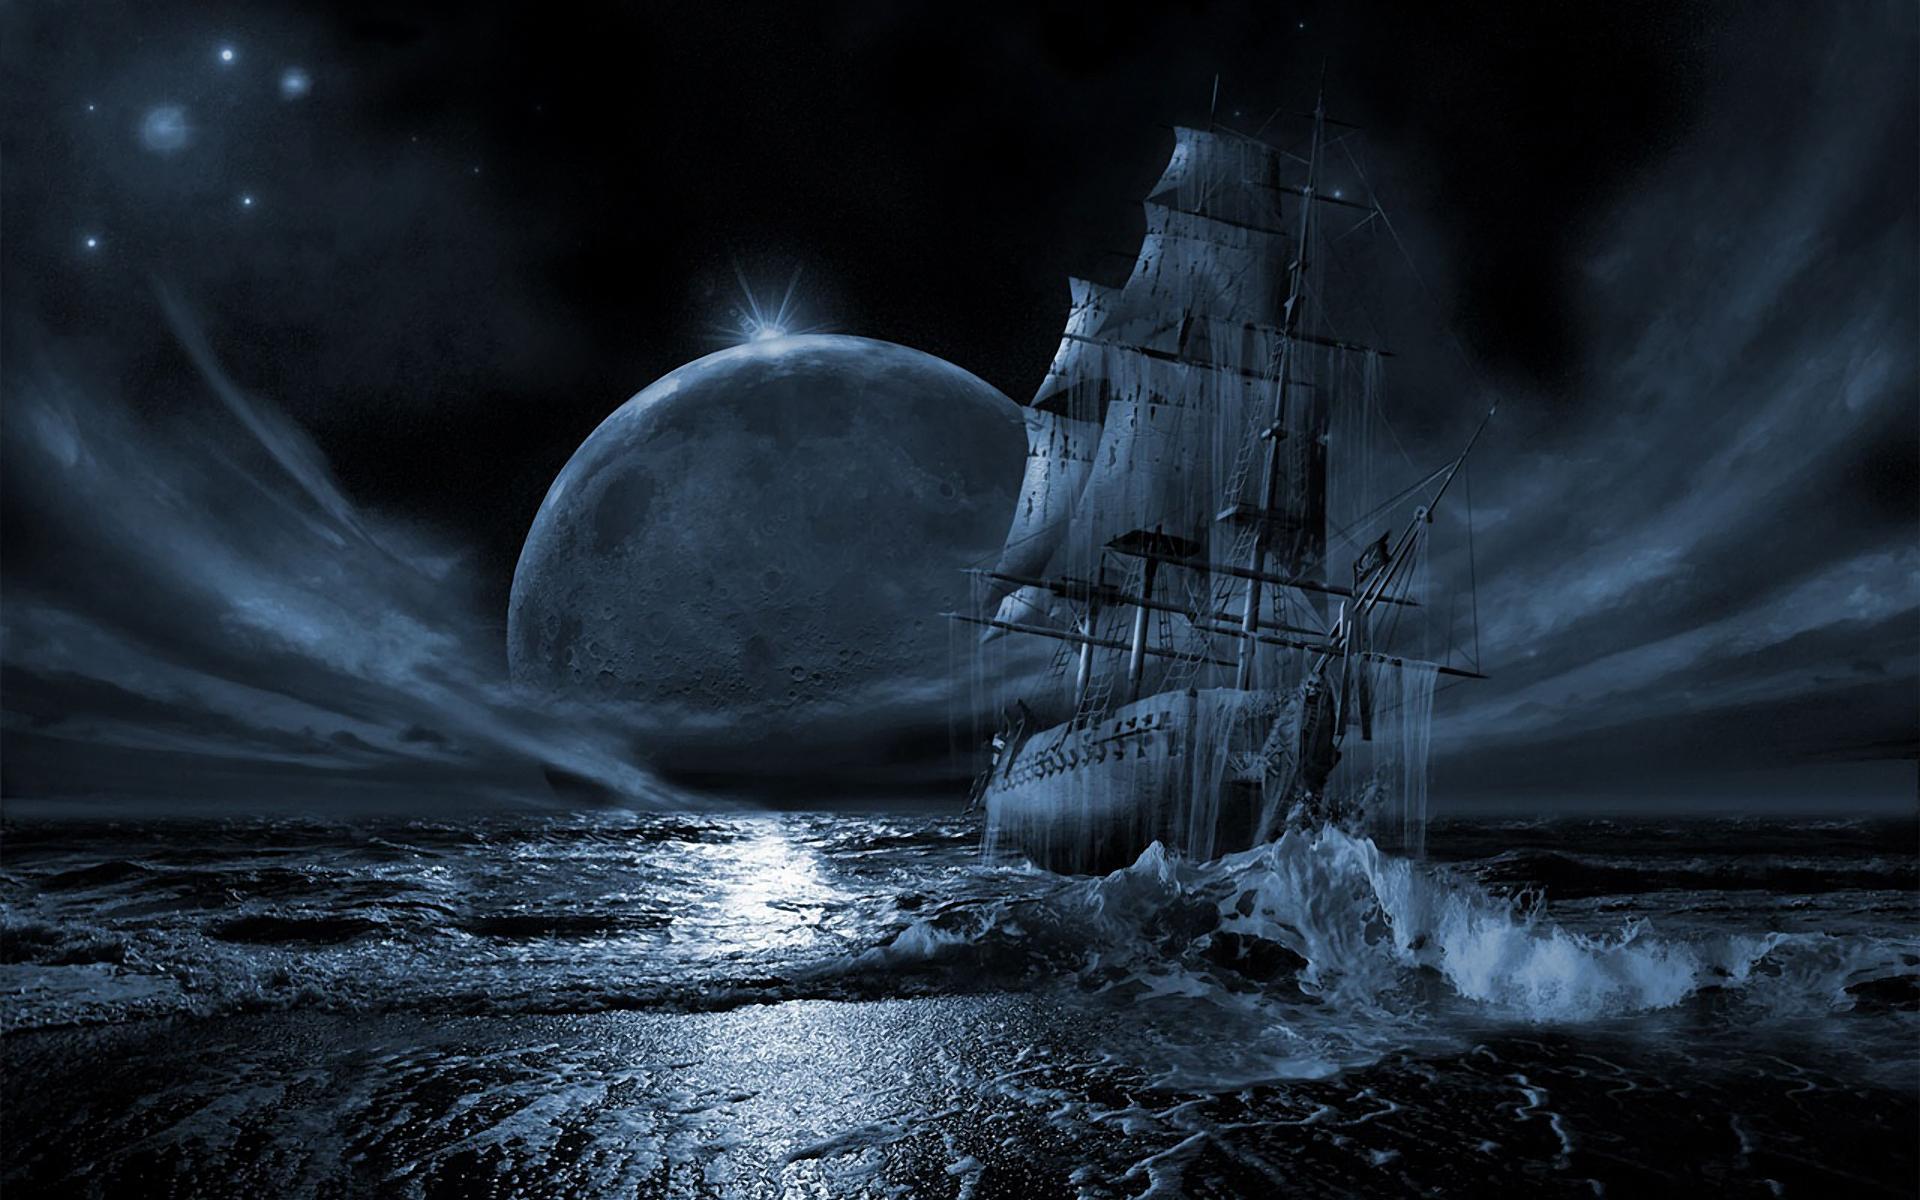 A ship sailing in the ocean at night - Pirate